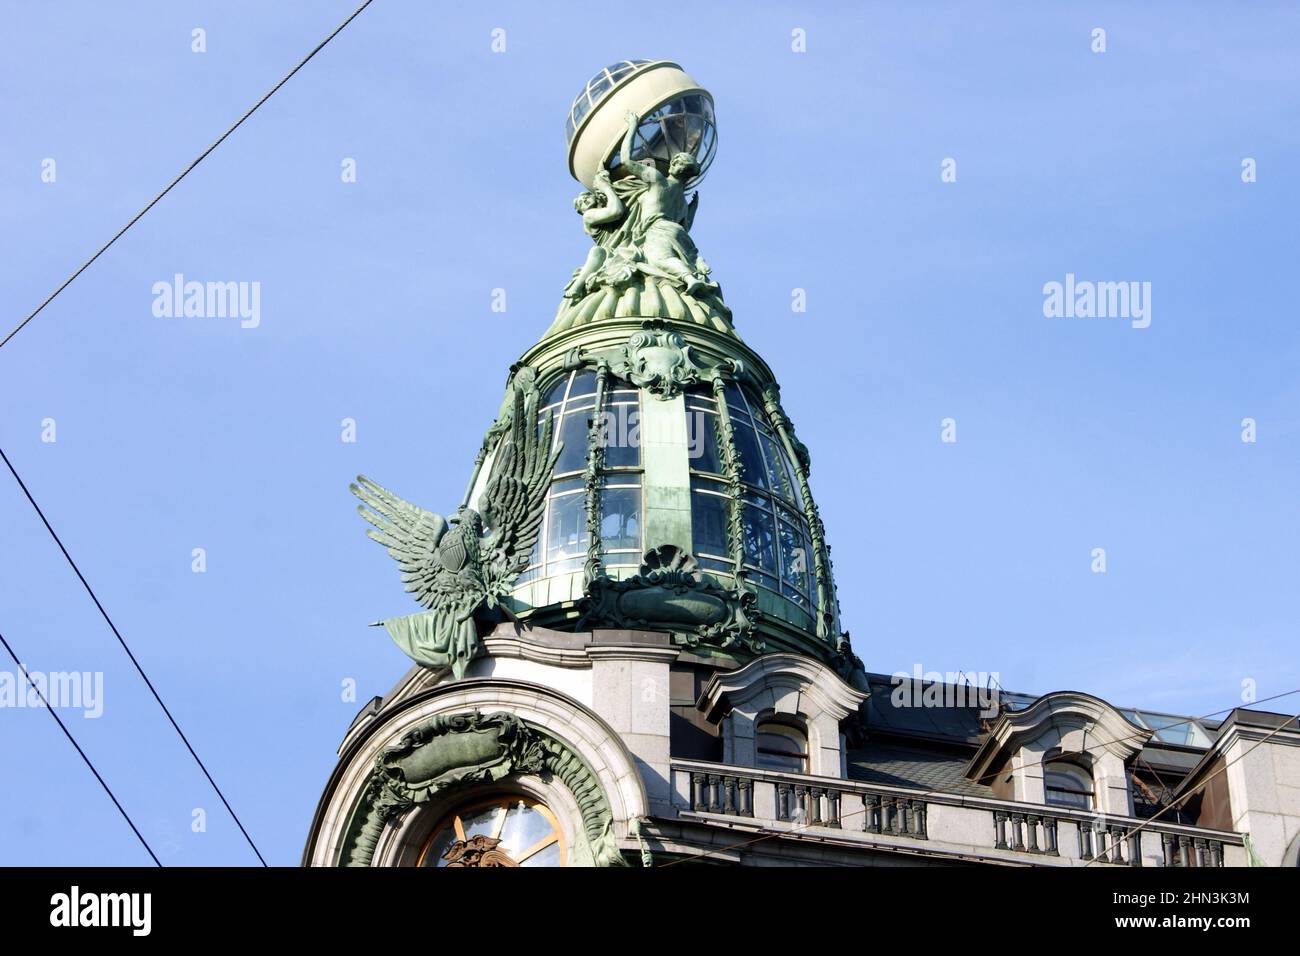 Skylight, topped with the globe, sculptural decorations of the early 20th-century historic landmark Singer House at Nevsky Prospekt, St. Petersburg Stock Photo